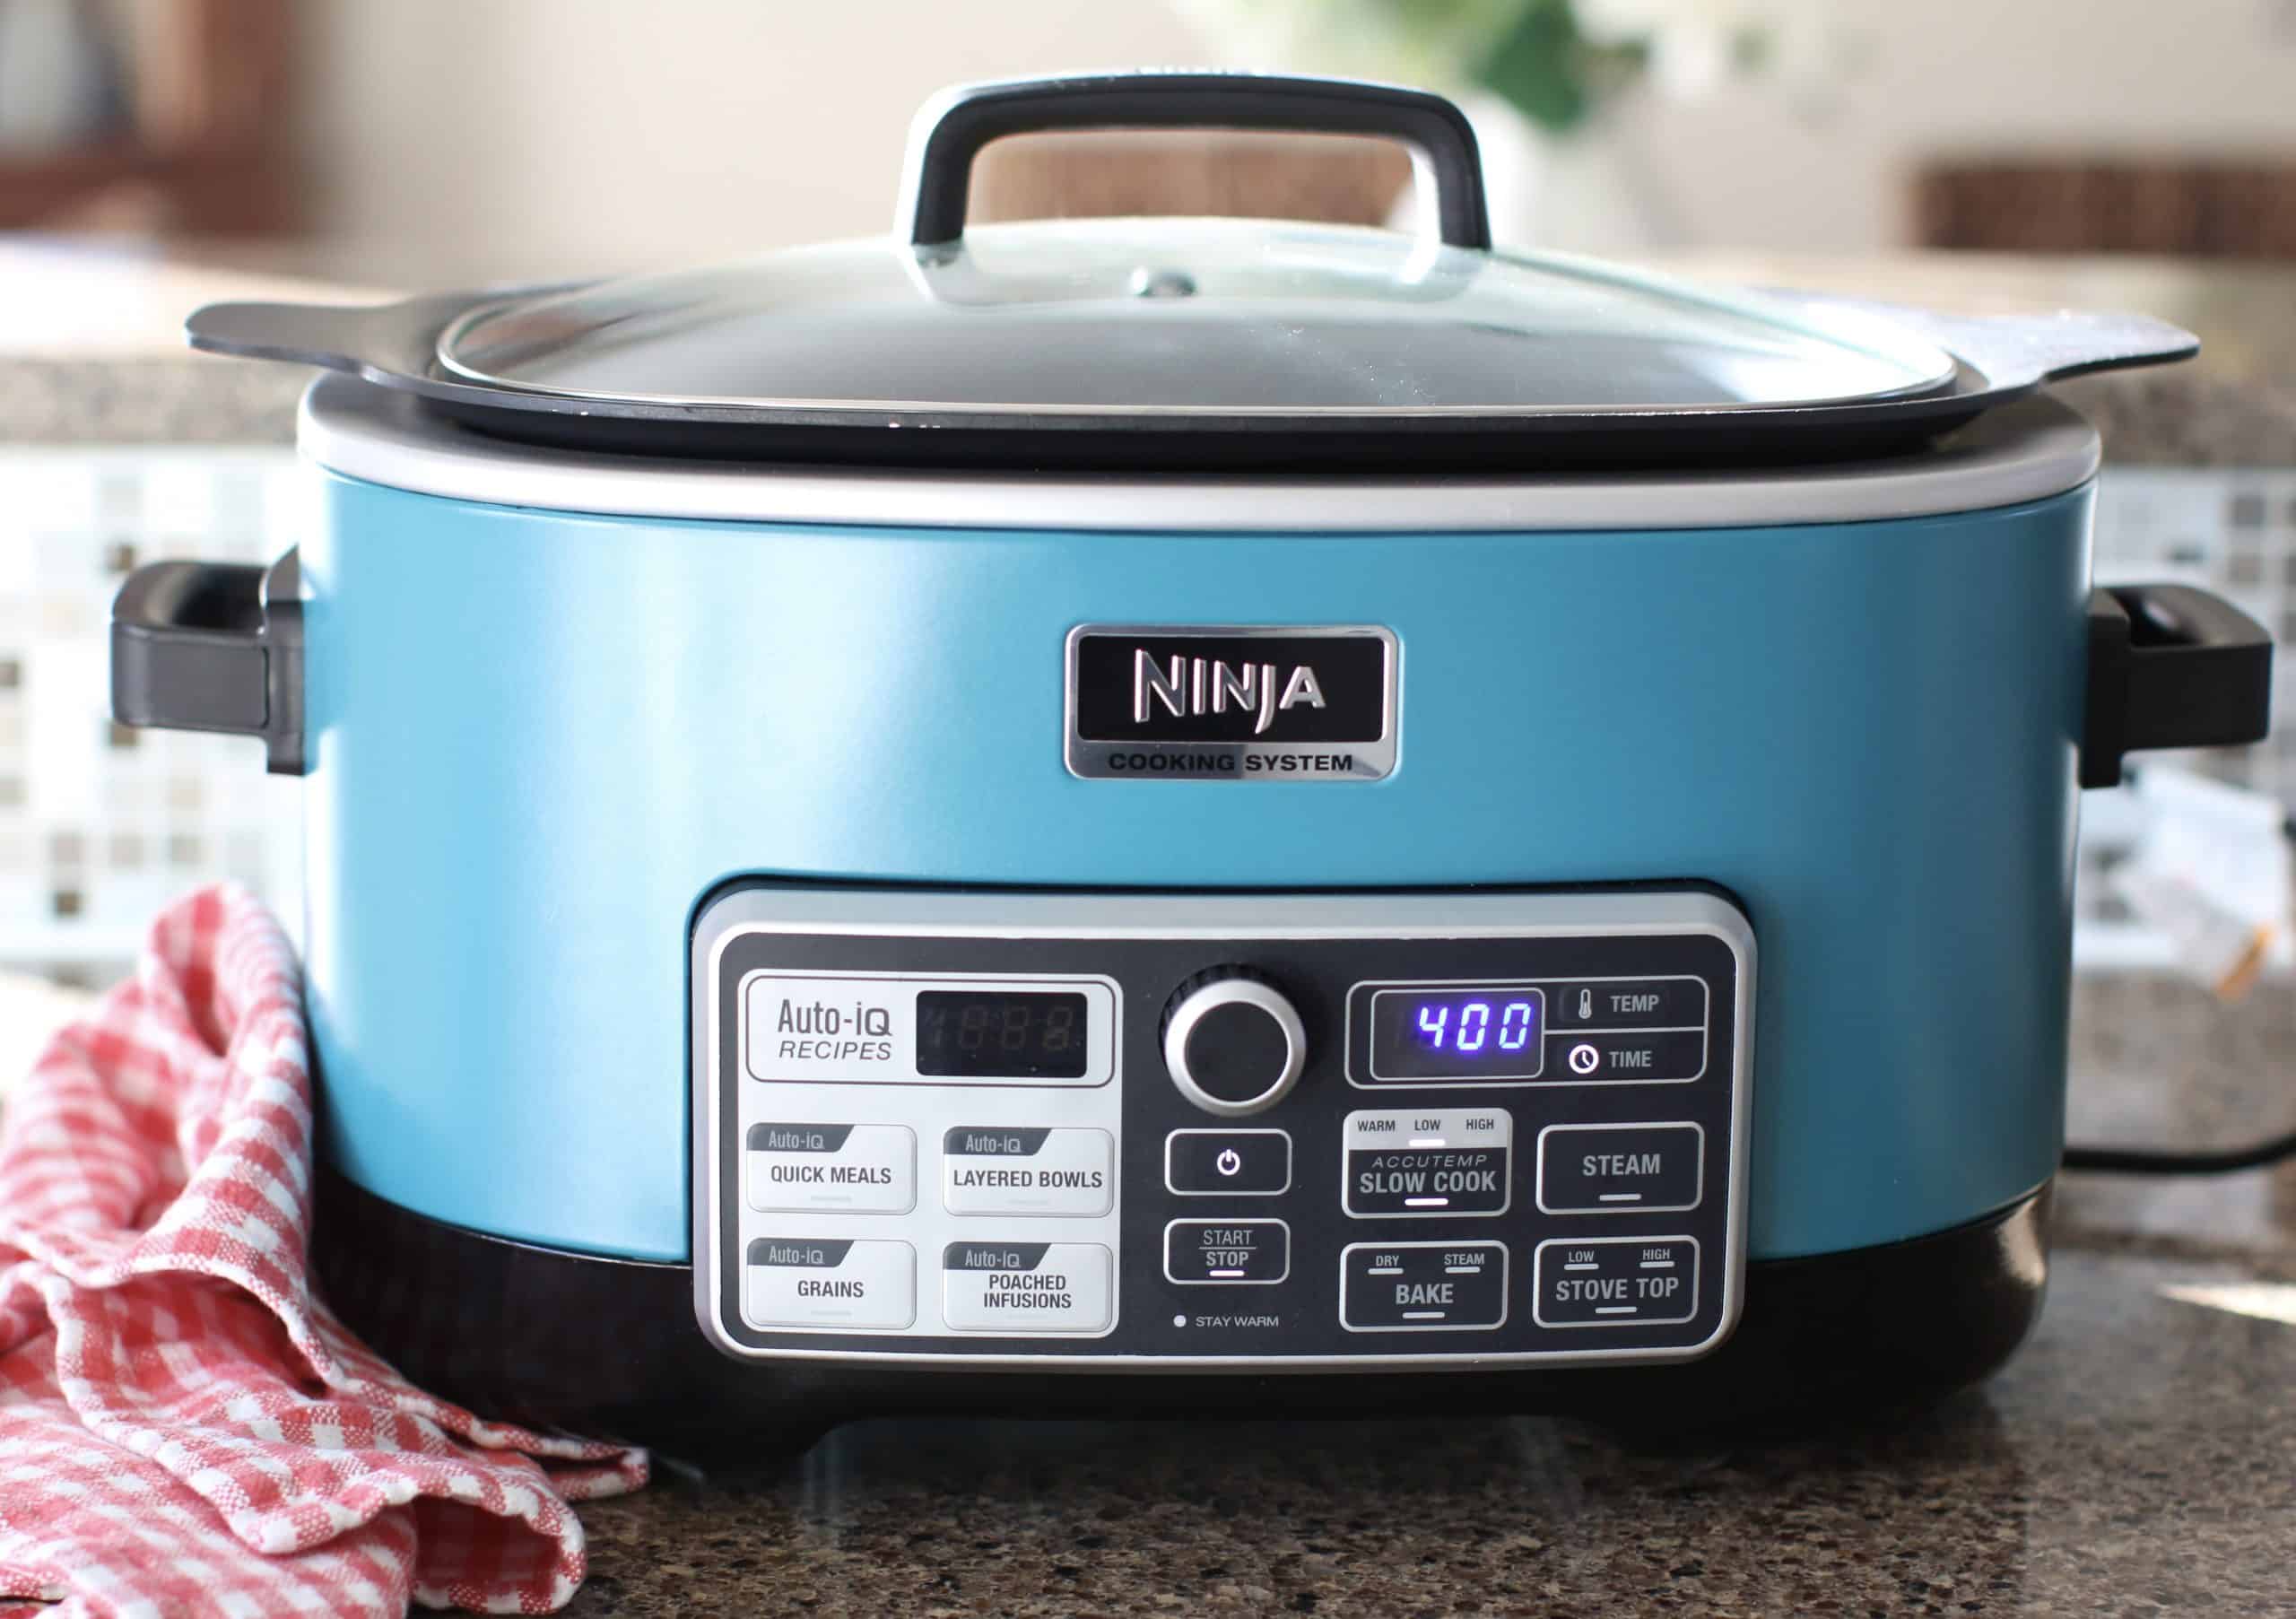 covered turquoise colored slow cooker showing a 4 hour cooking time on digital display.